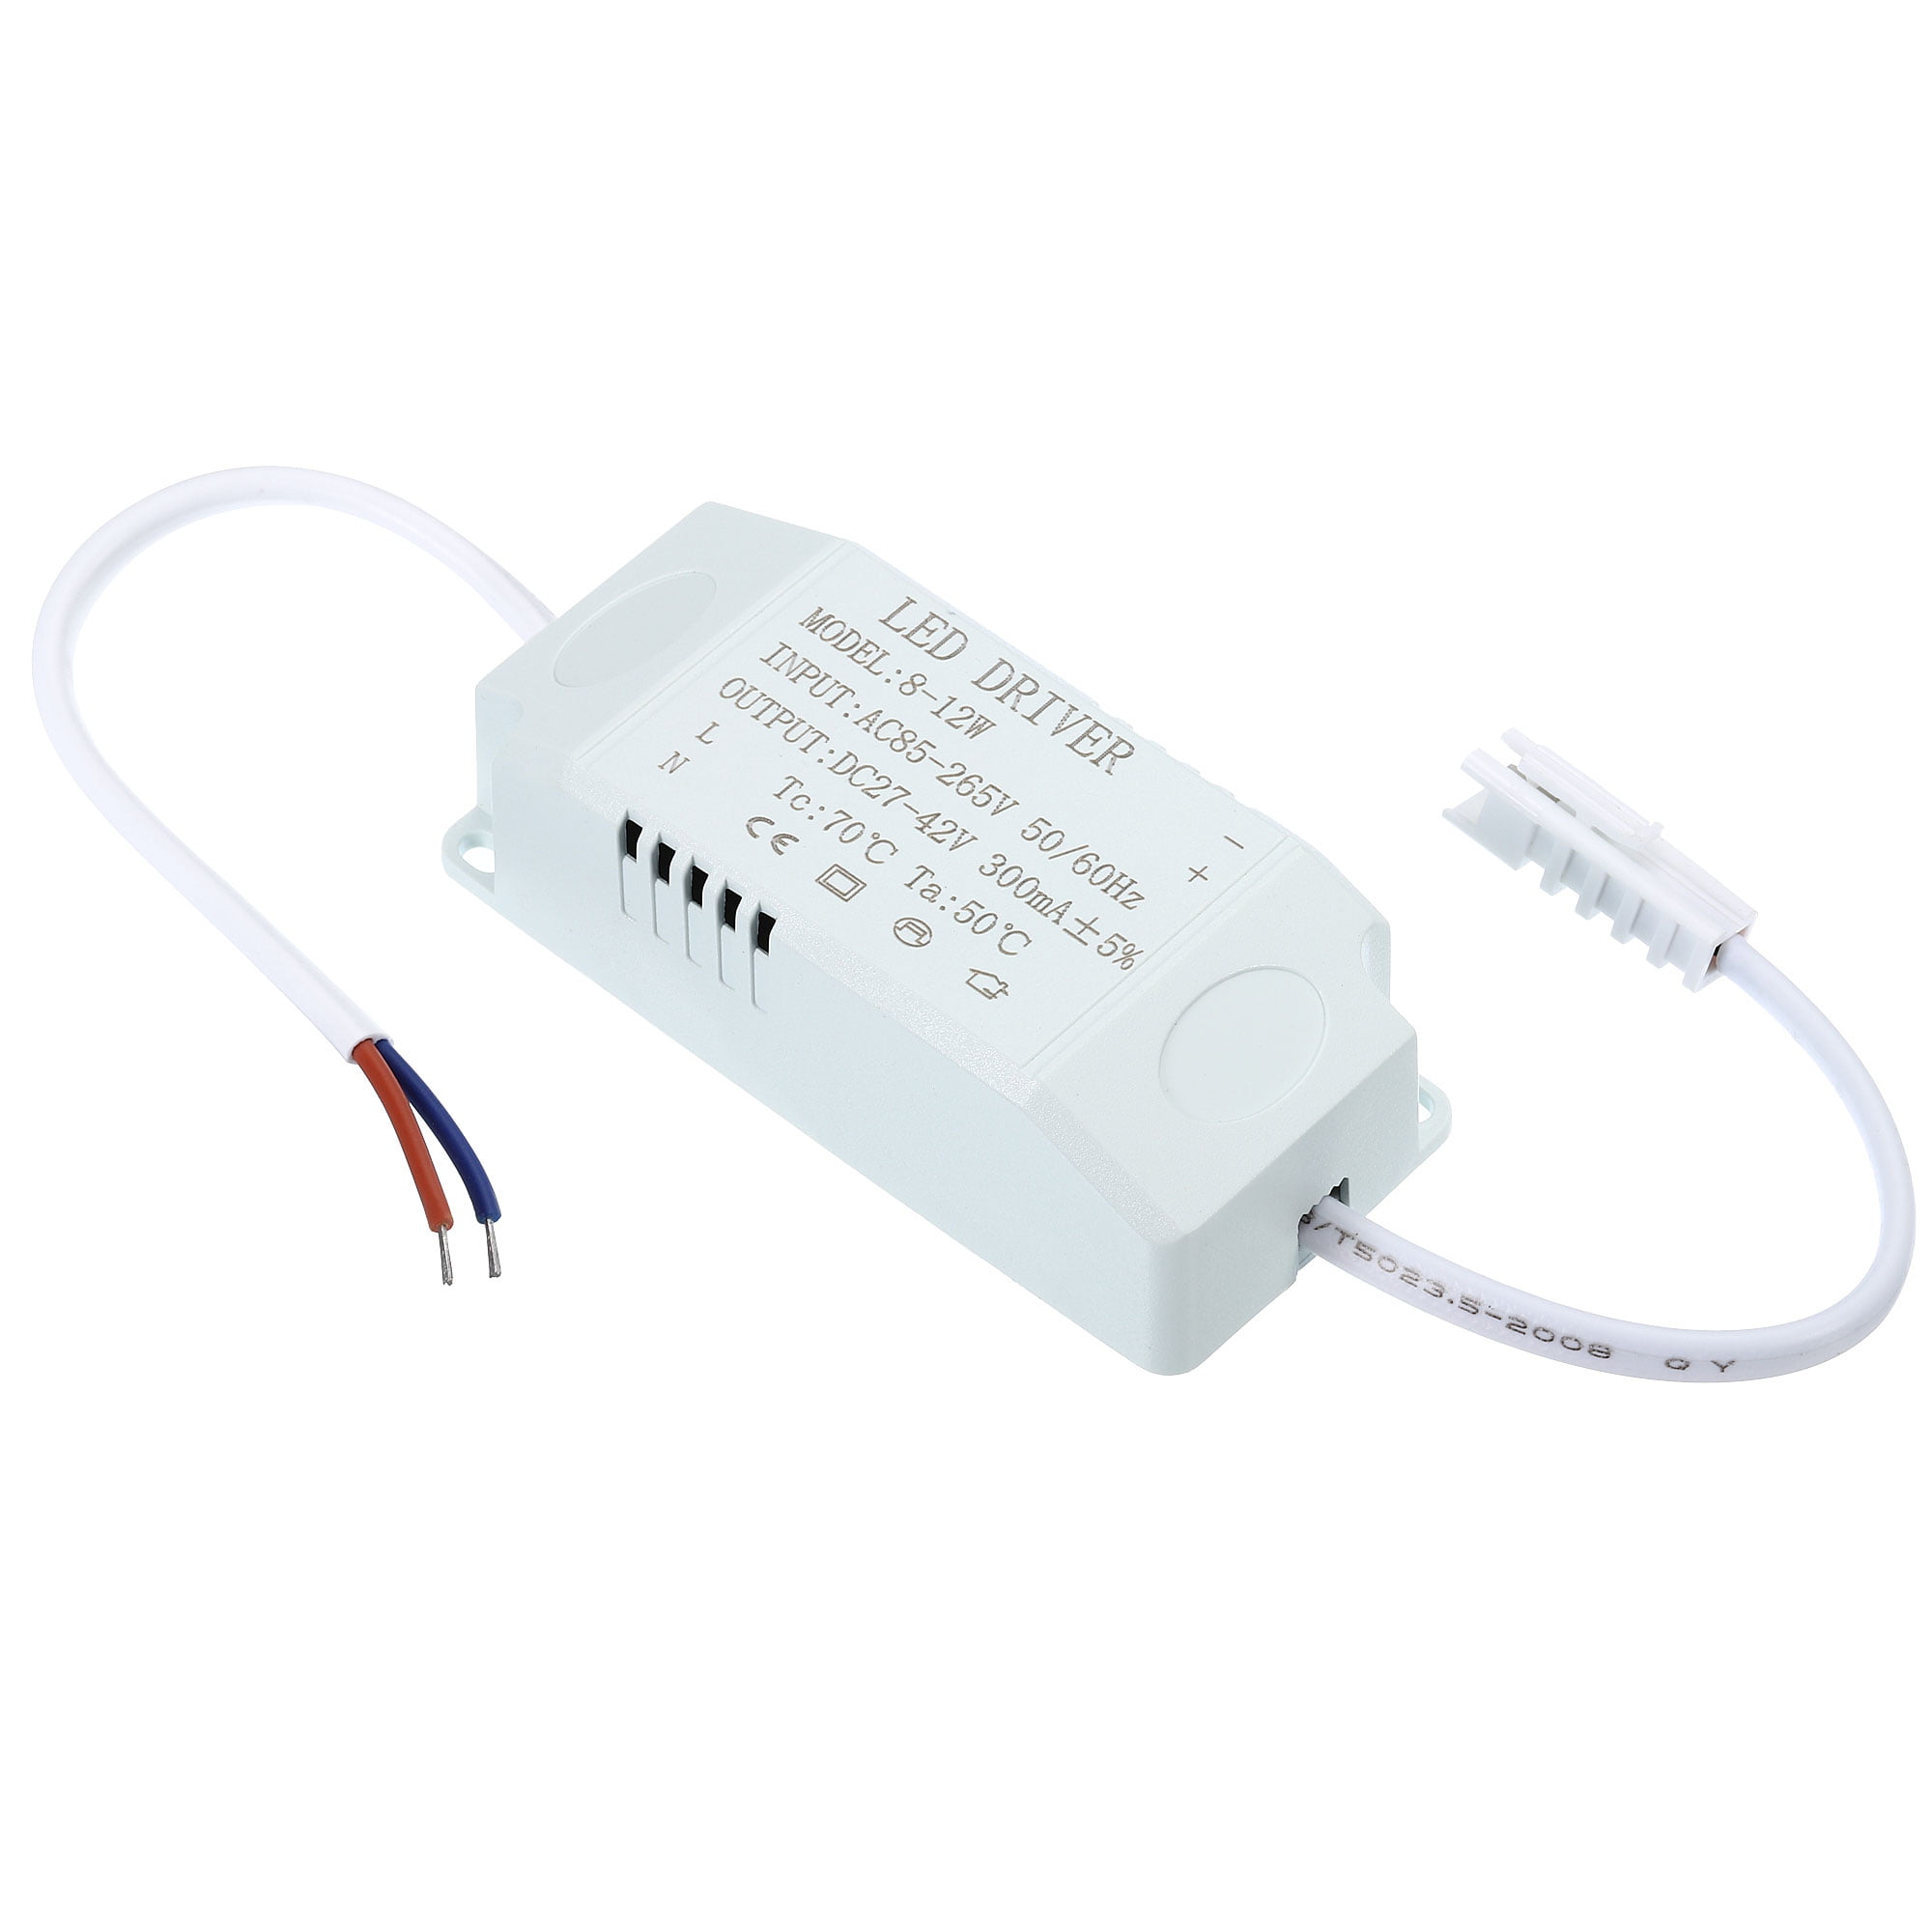  8-12W 86-265V LED Power Driver : Industrial & Scientific